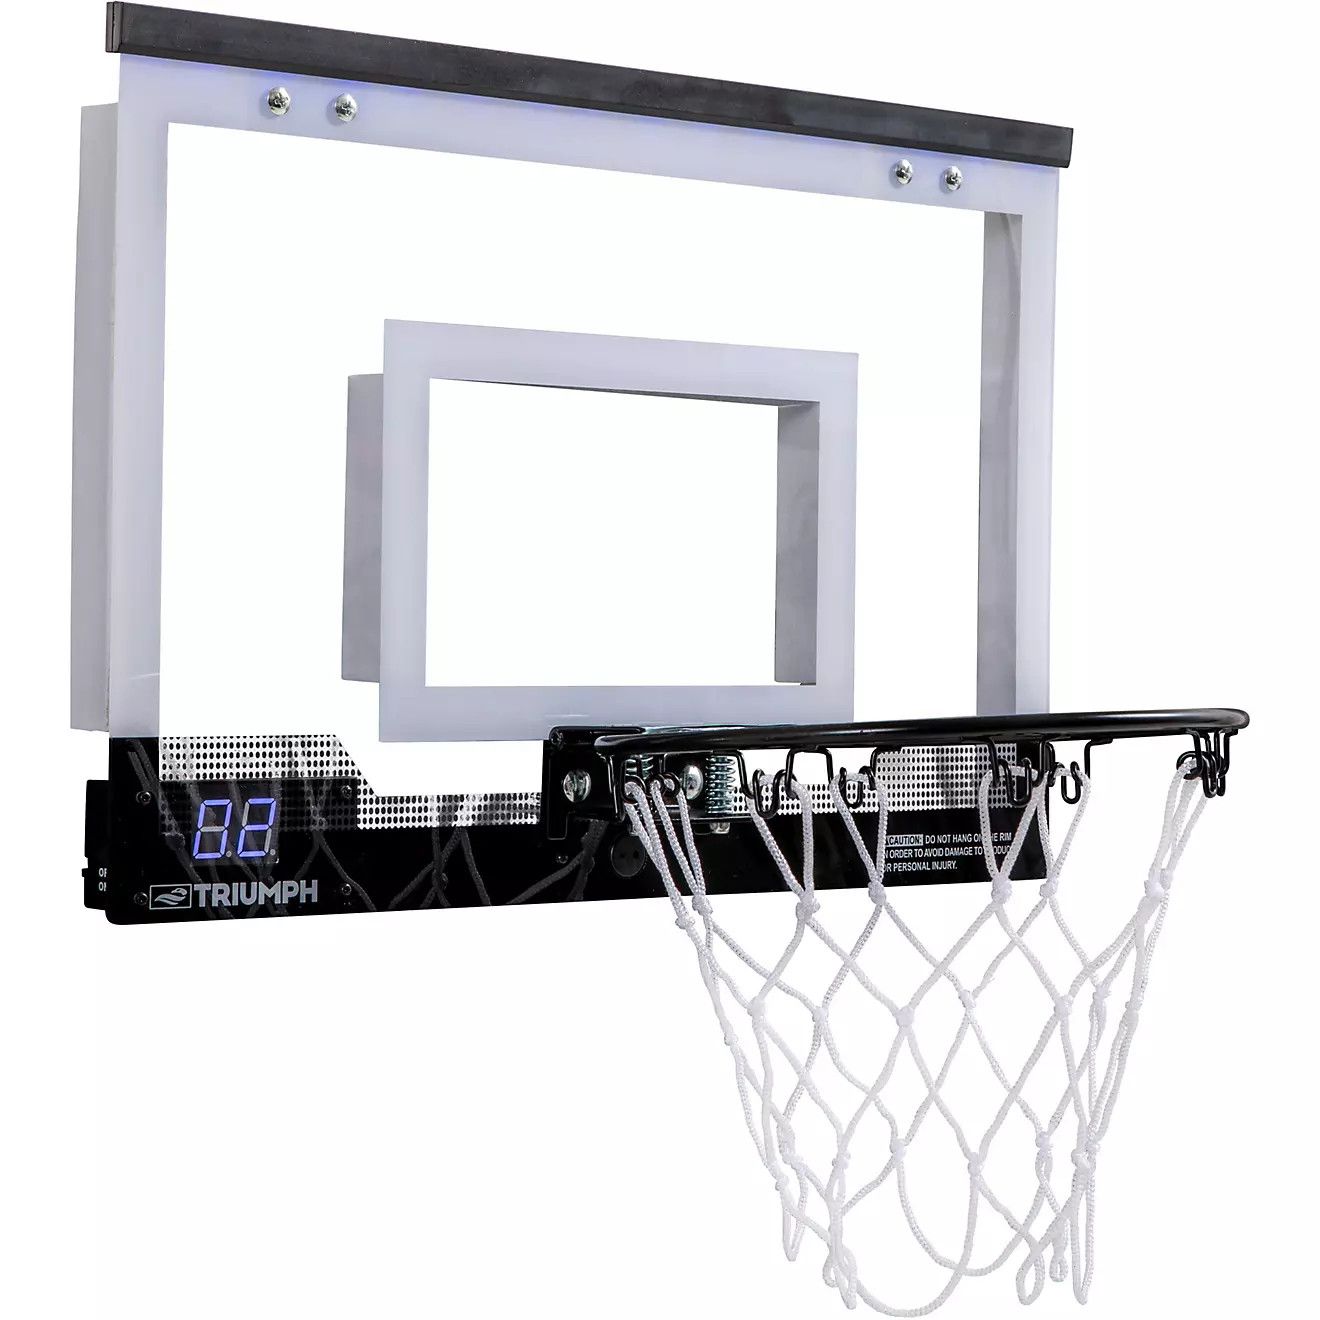 Triumph Over-the-Door 18 in LED Mini Basketball Hoop | Academy Sports + Outdoors